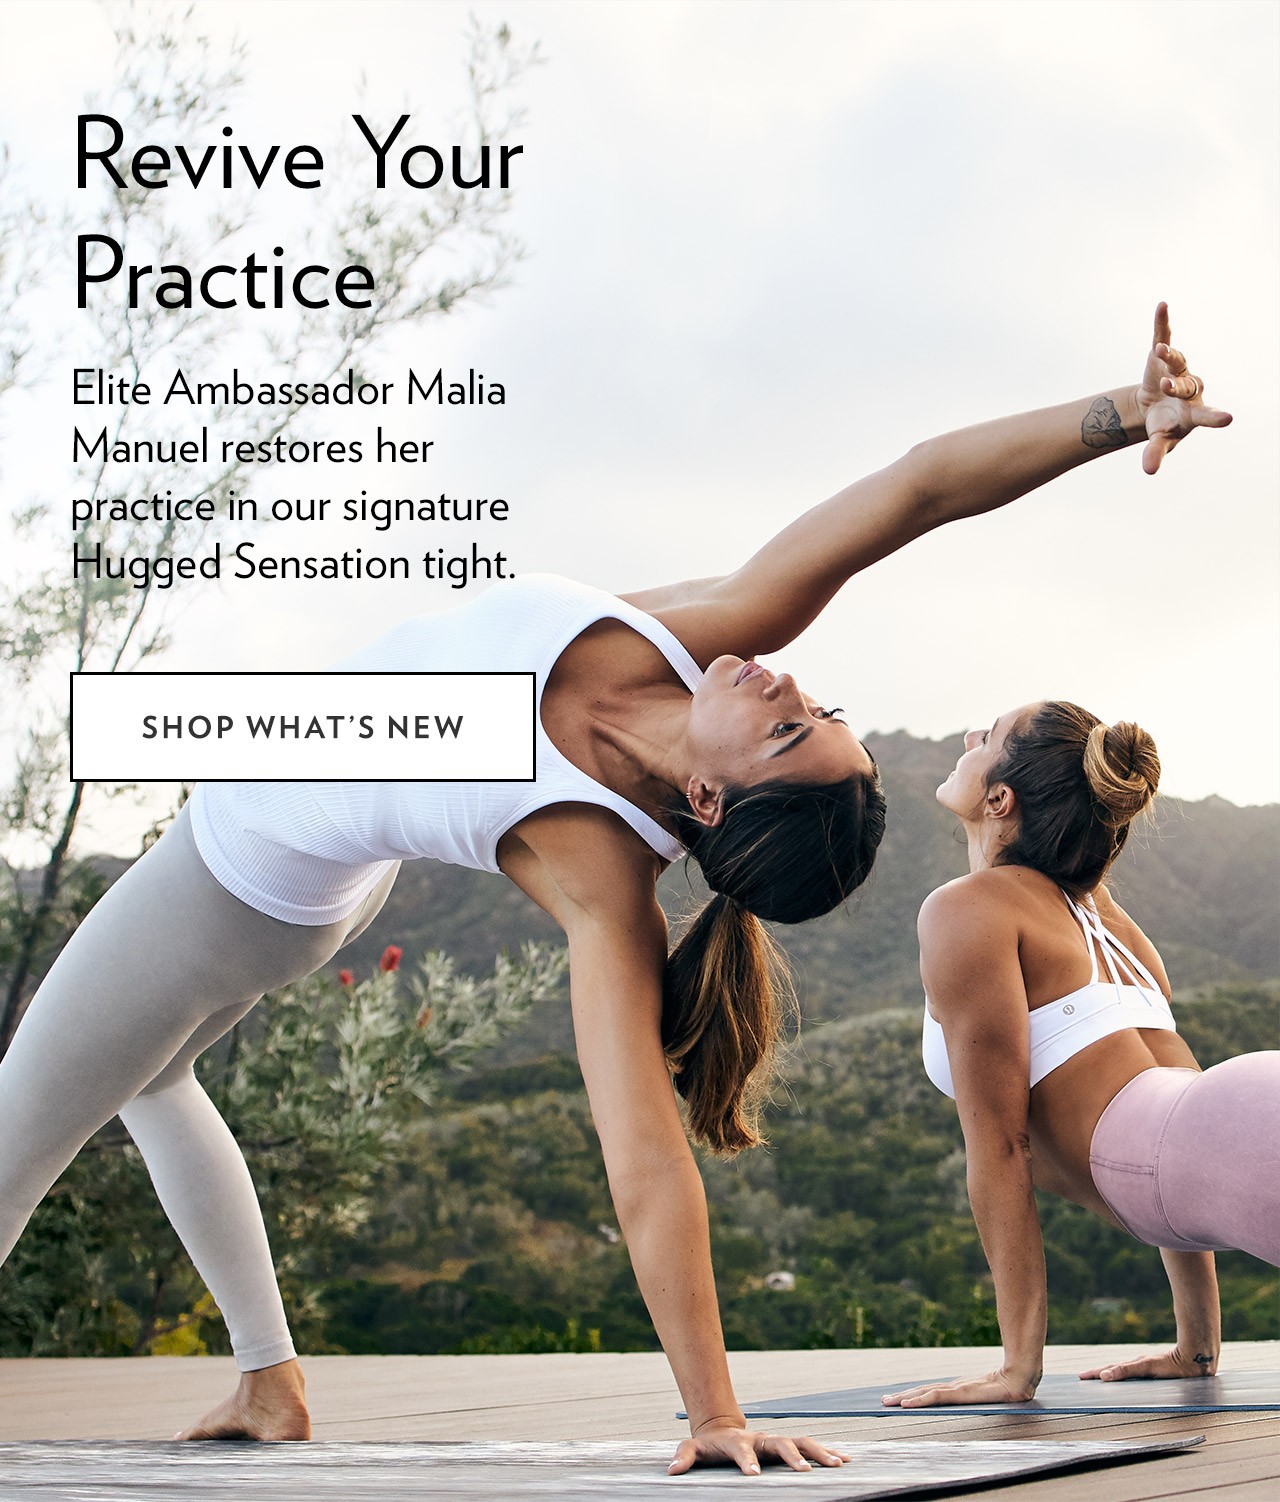 Revive Your Practice - SHOP WHAT'S NEW